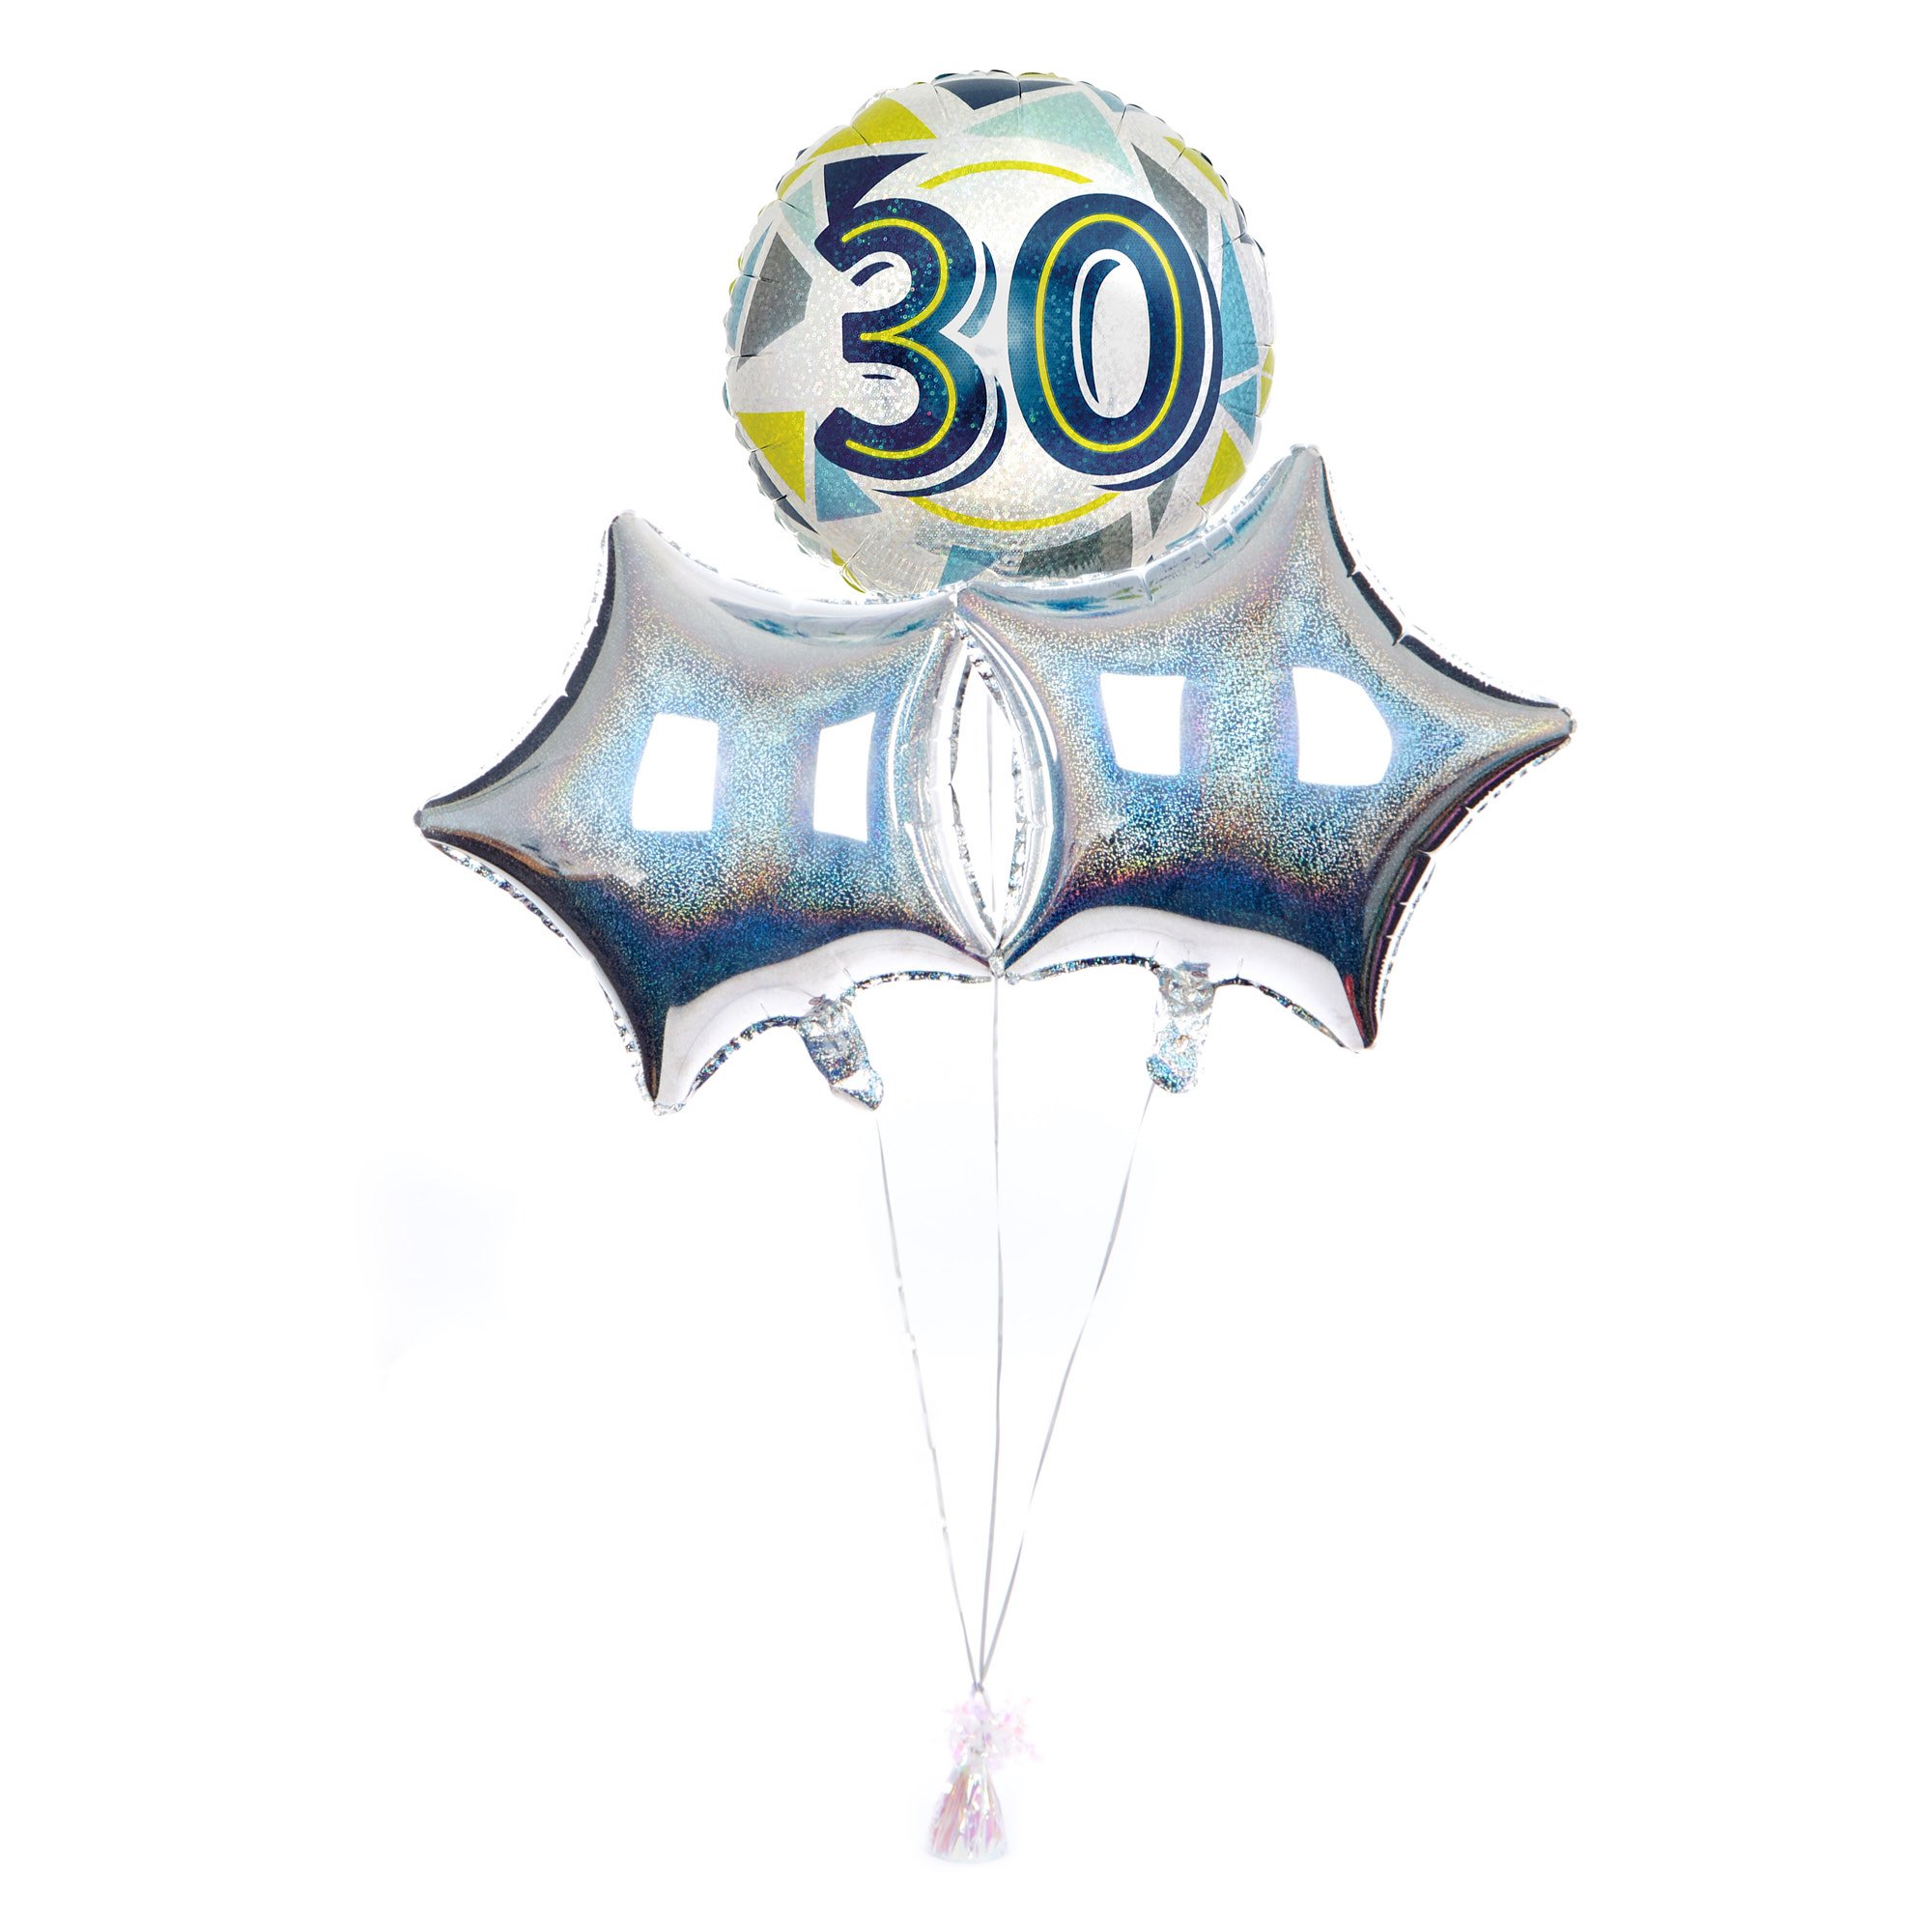 Geometric Blue & Yellow 30th Birthday Balloon Bouquet - DELIVERED INFLATED!